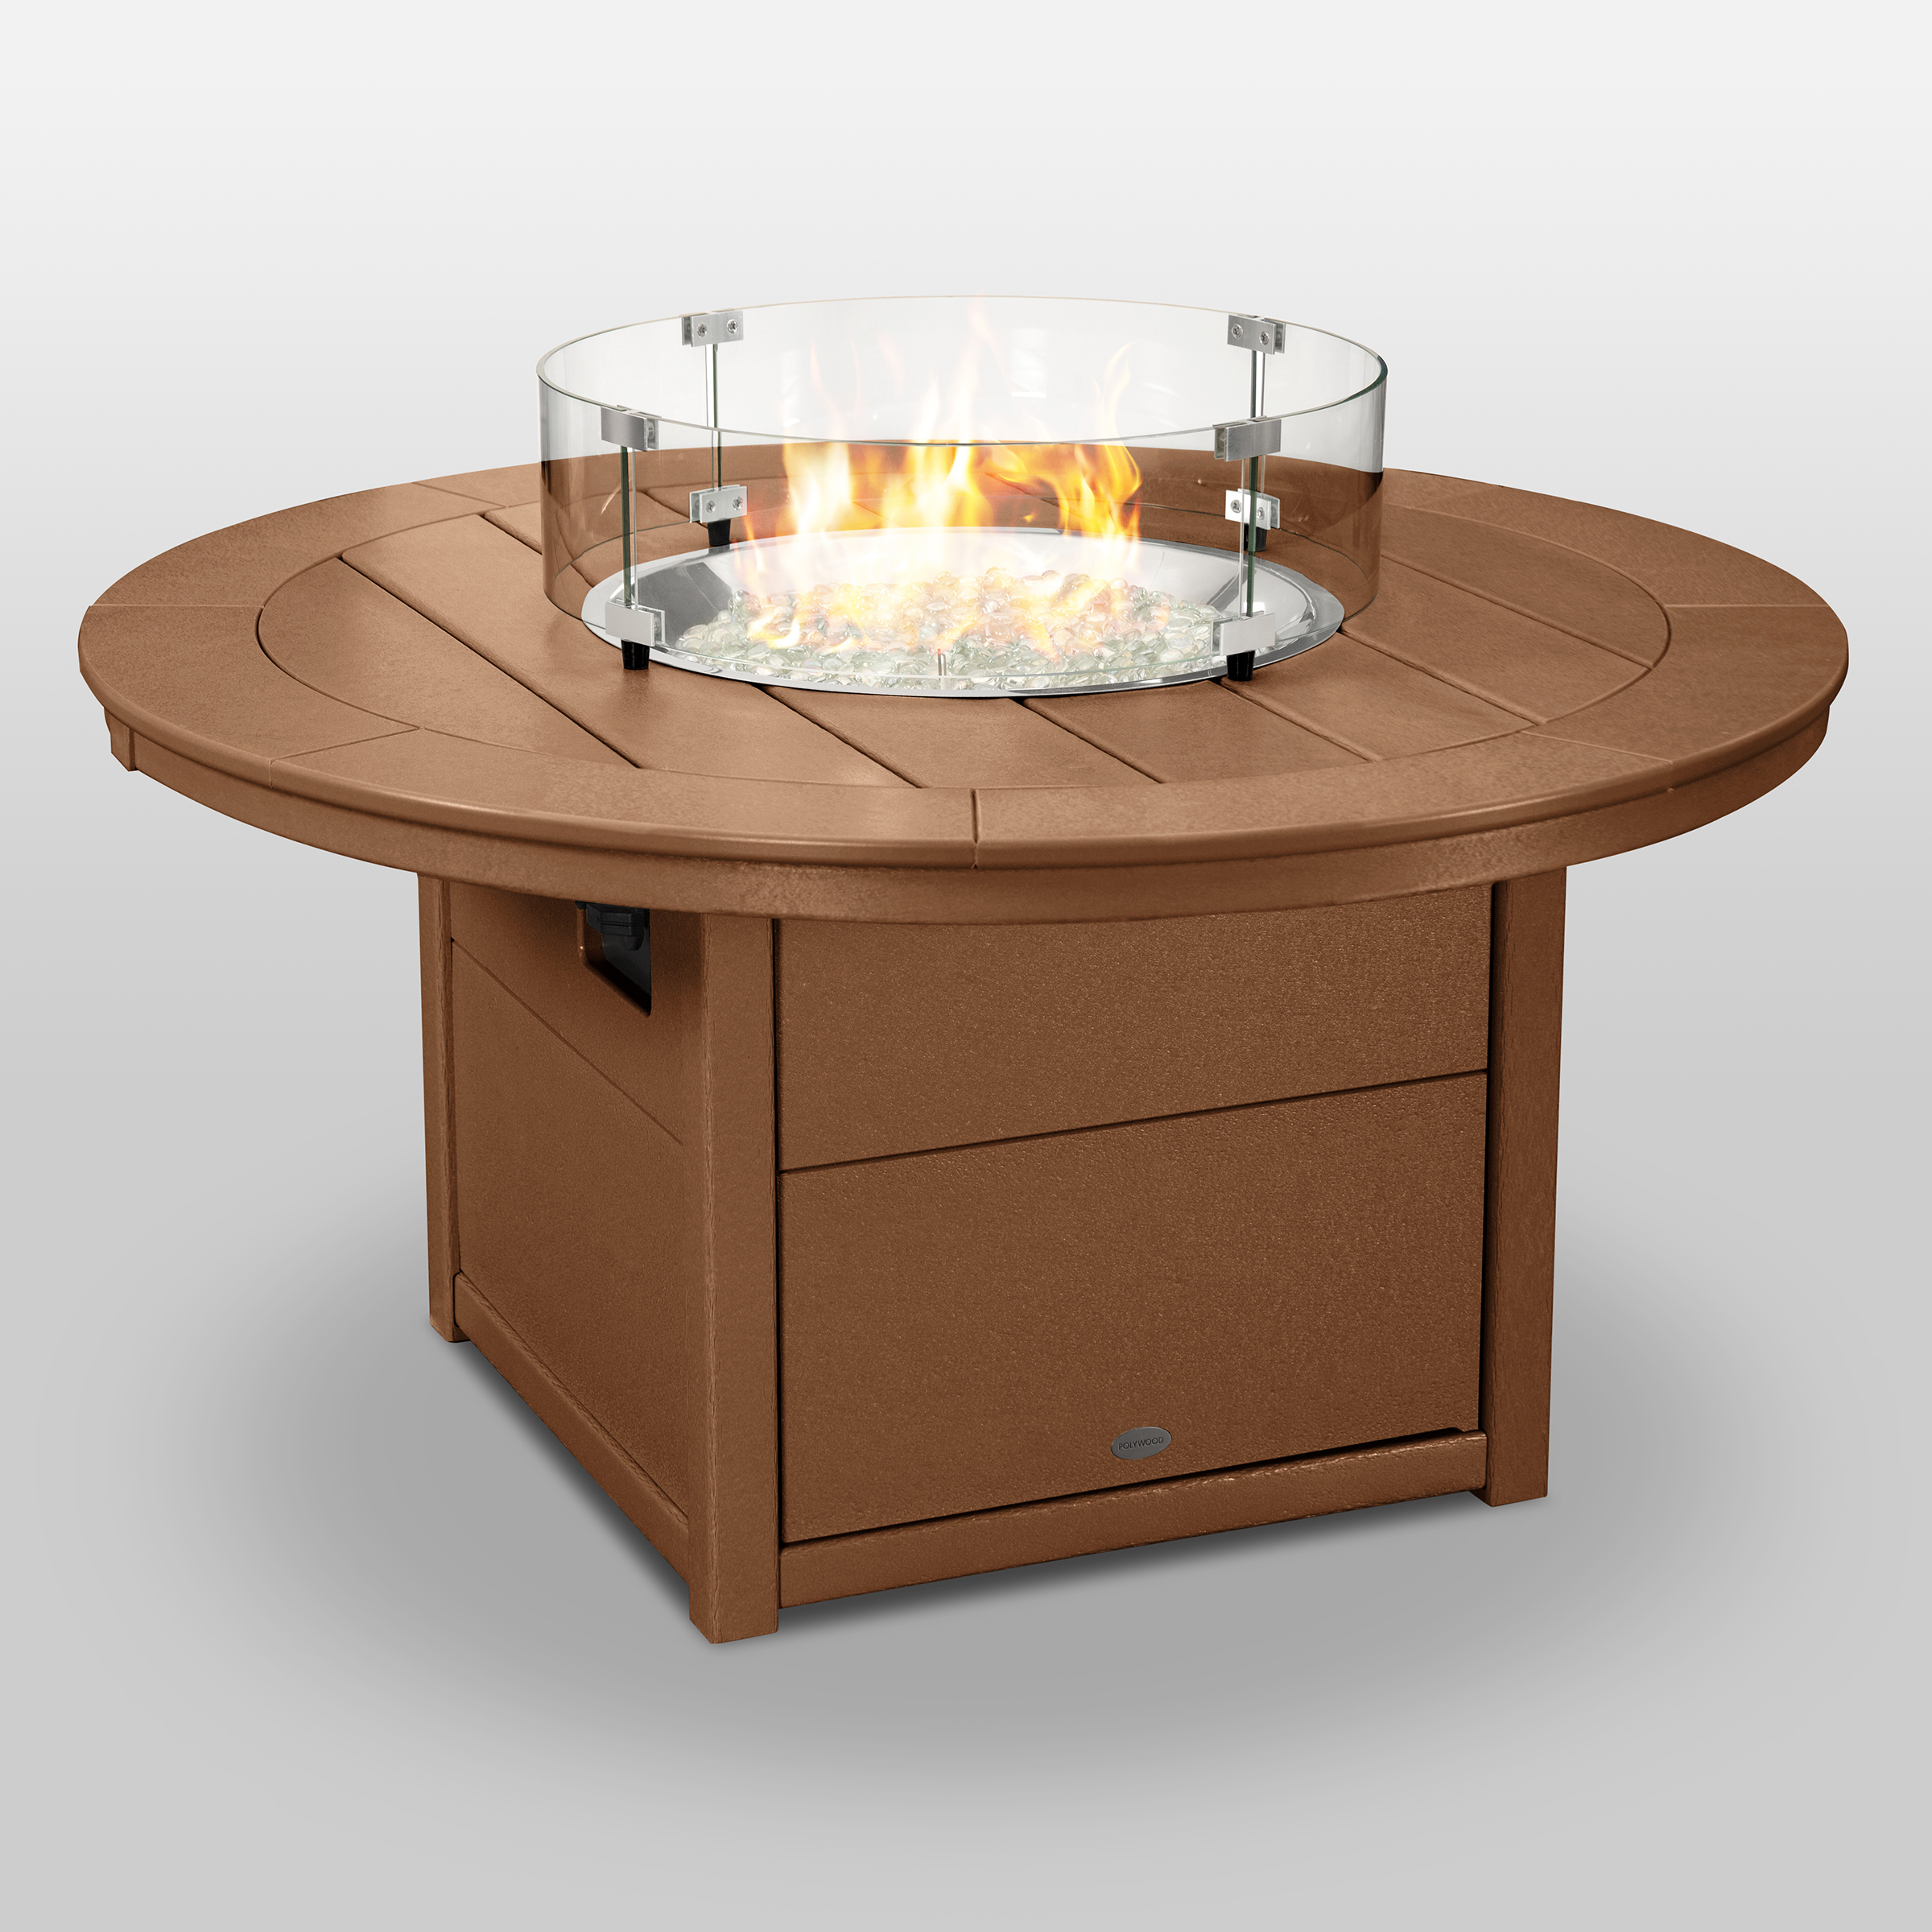 round 48 inch fire pit table in teak thumbnail image